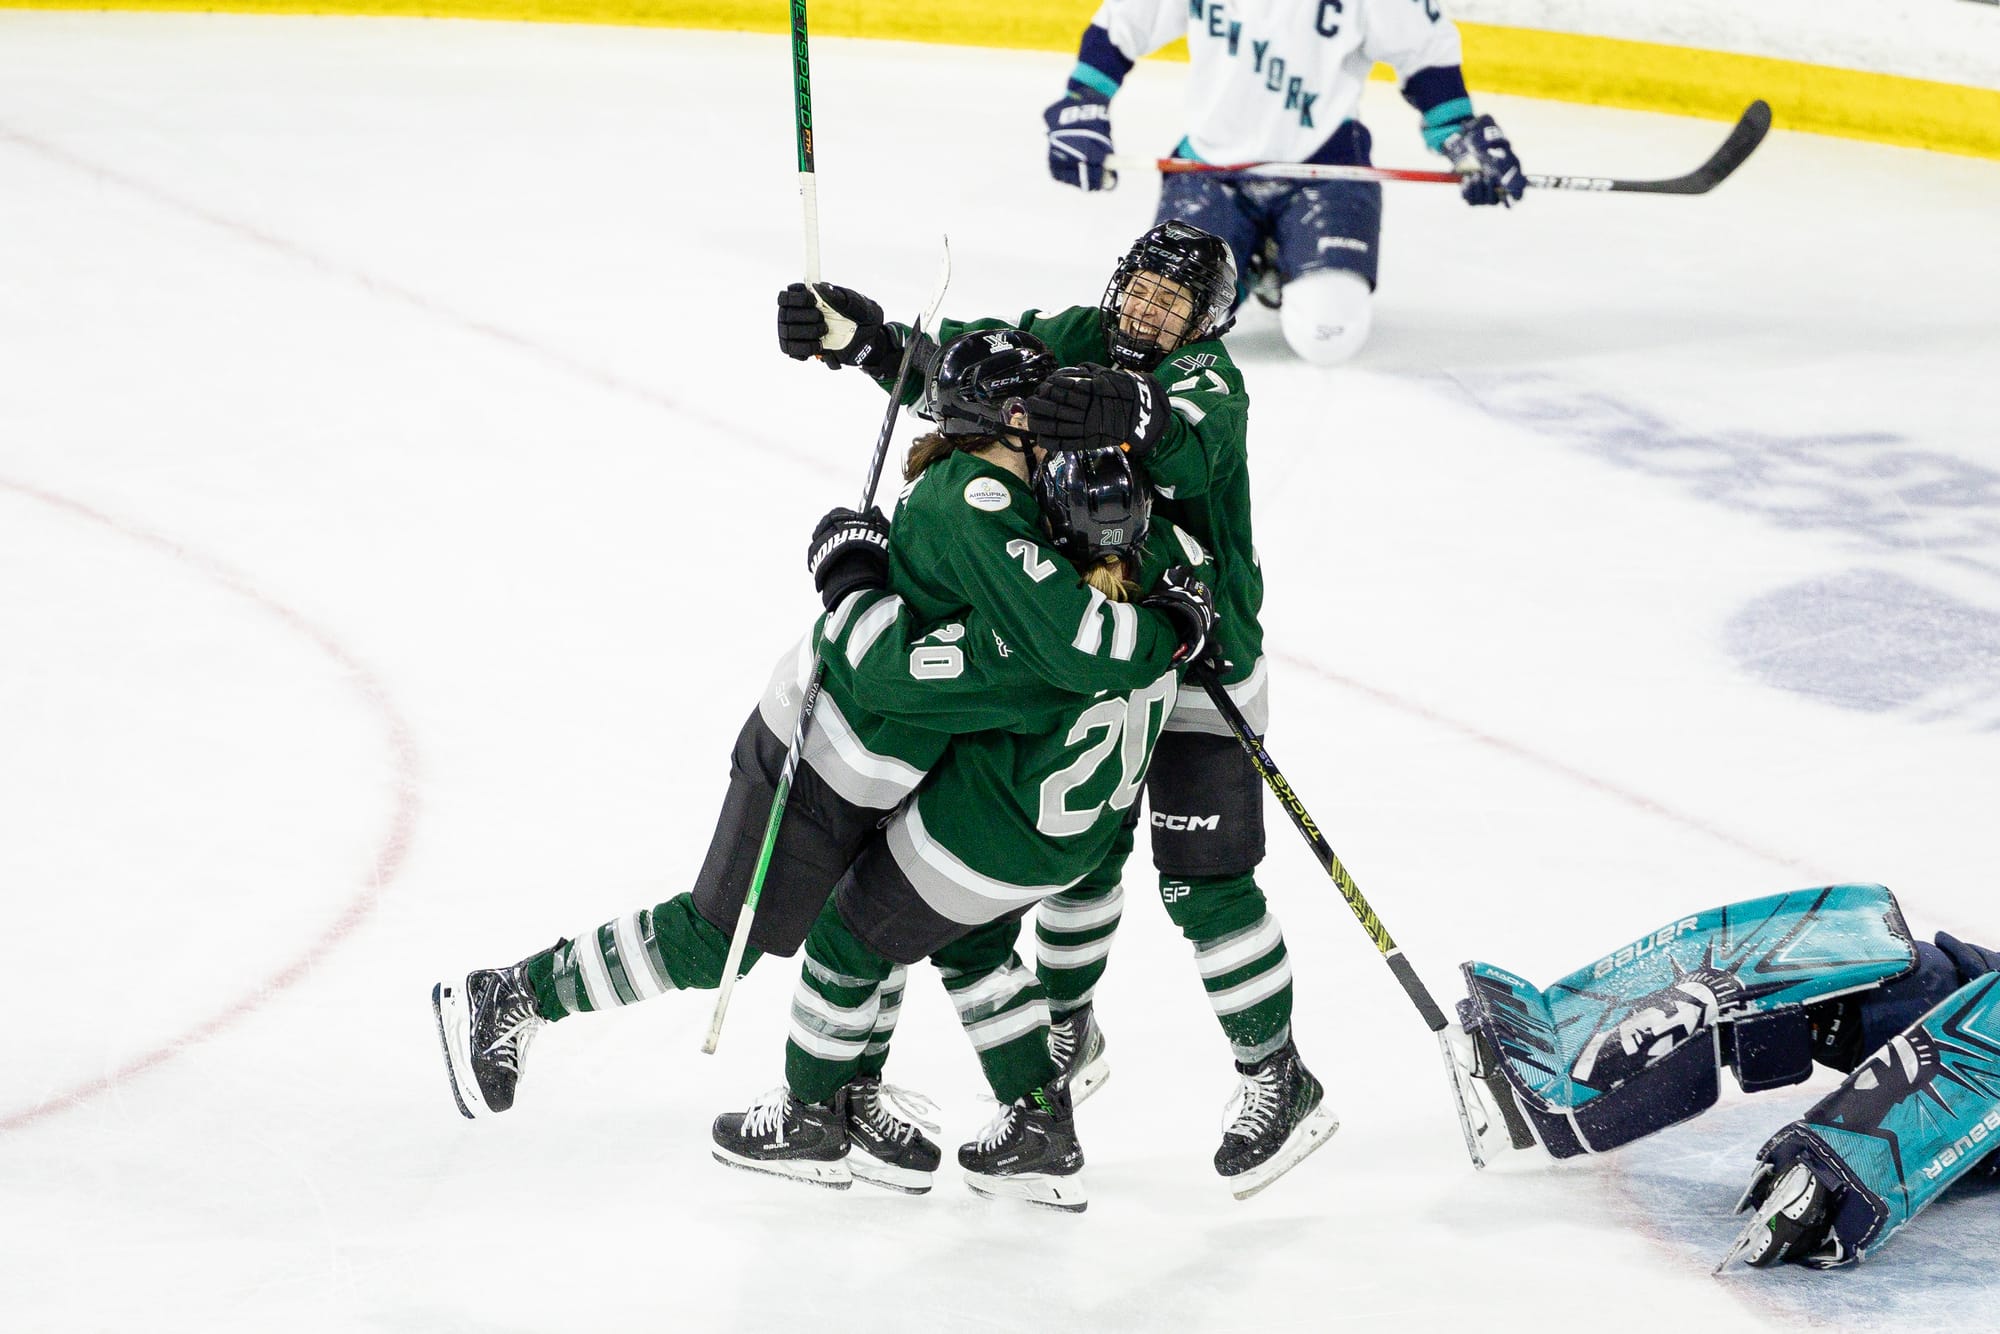 Emily Brown and Jamie Lee Rattray hug-tackle Hannah Brandt following her OT winner. Each player is wearing their green home jersey, and Brandt is starting to fall over. In the bottom right corner are Abbey Levy's legs as she lays on the ice after allowing the goal.